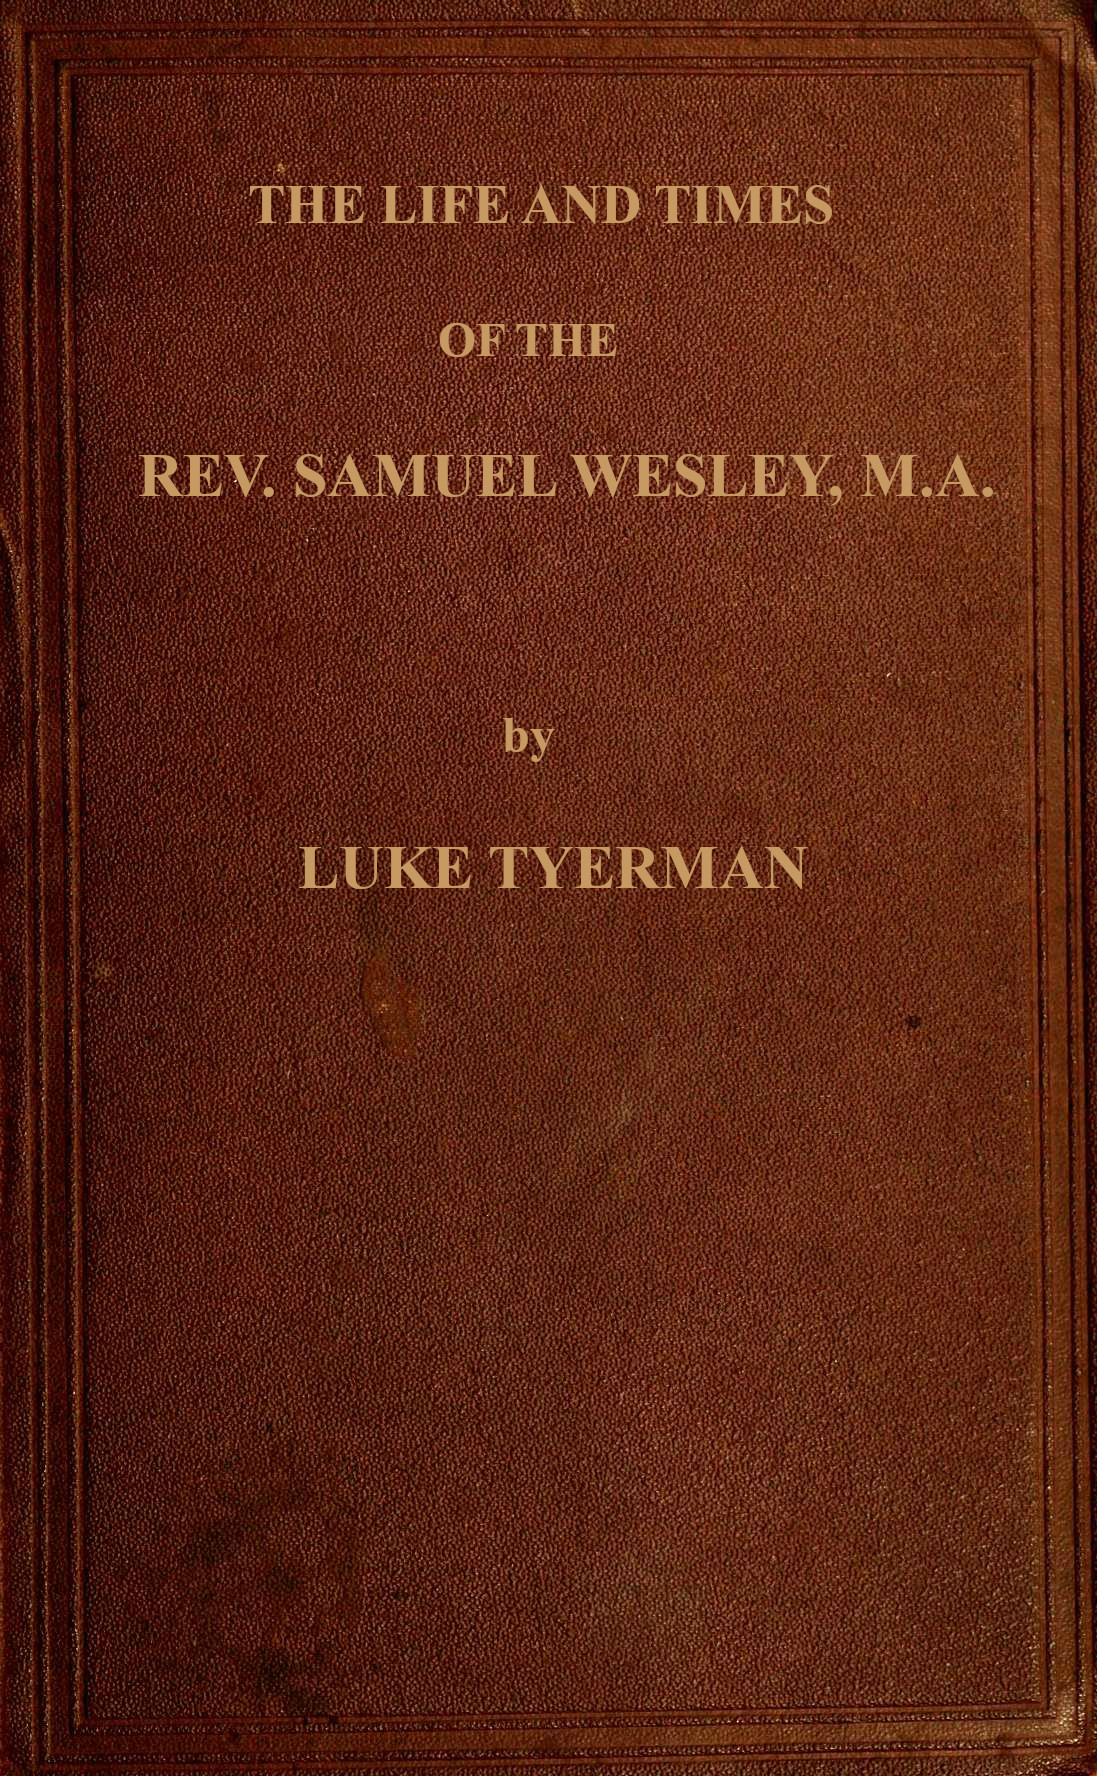 The life and times of the Rev. Samuel Wesley&#10;Rector of Epworth and father of the Revs. John and Charles Wesley, the founders of the Methodists